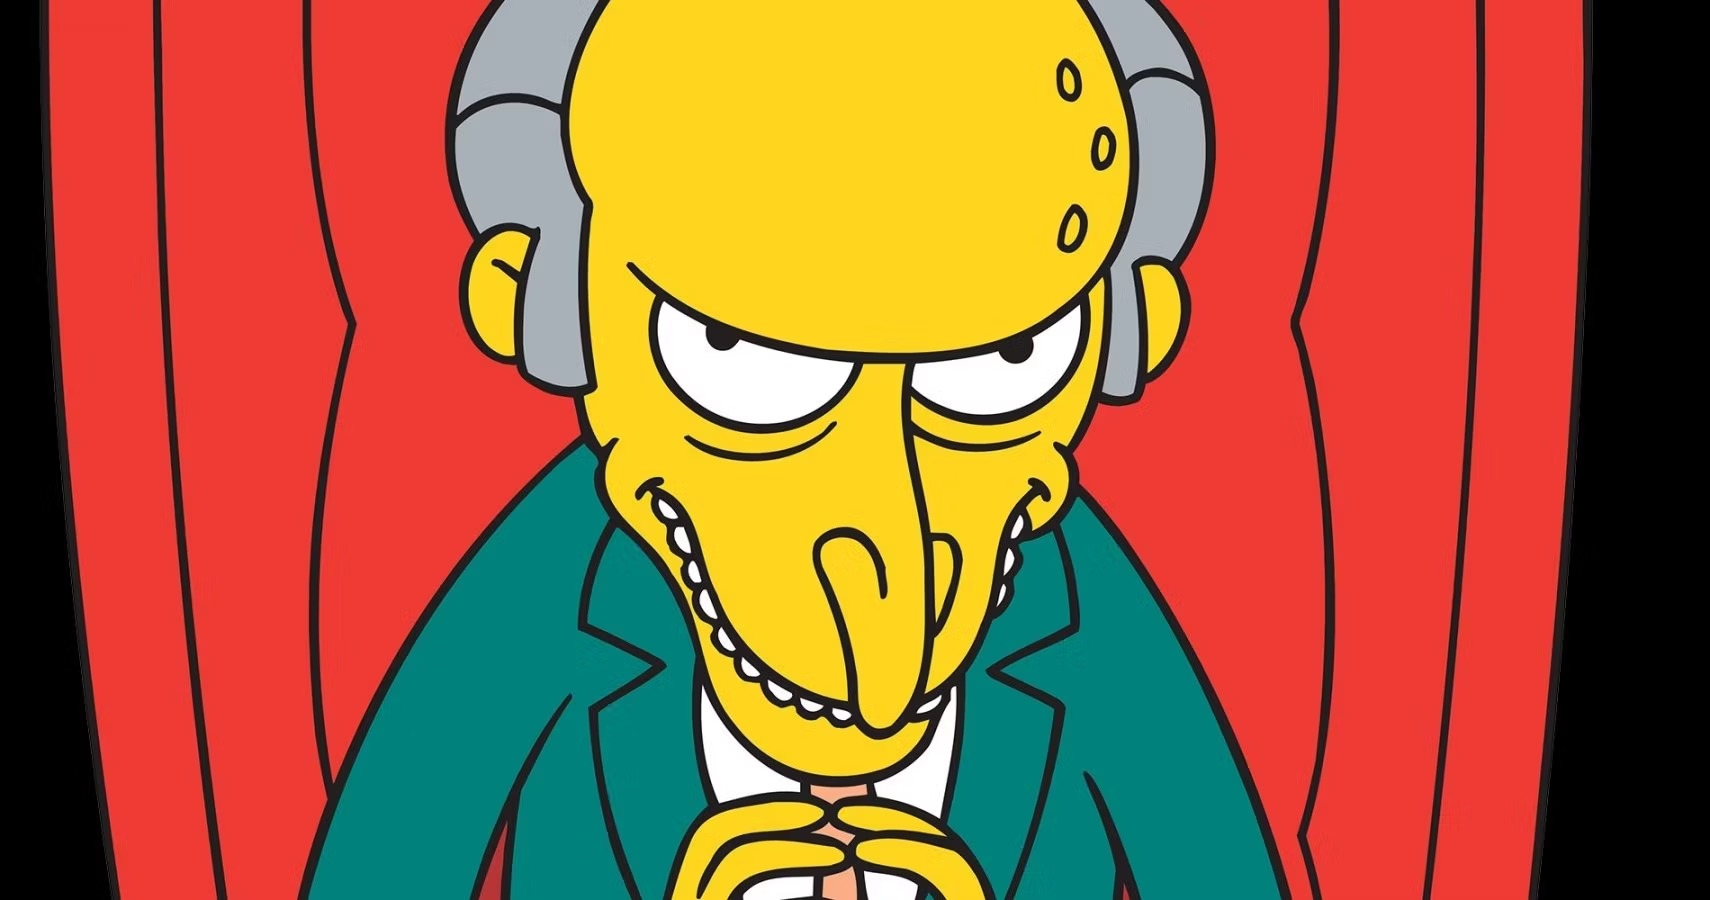 23-facts-about-mr-burns-the-simpsons-1694335118.jpg